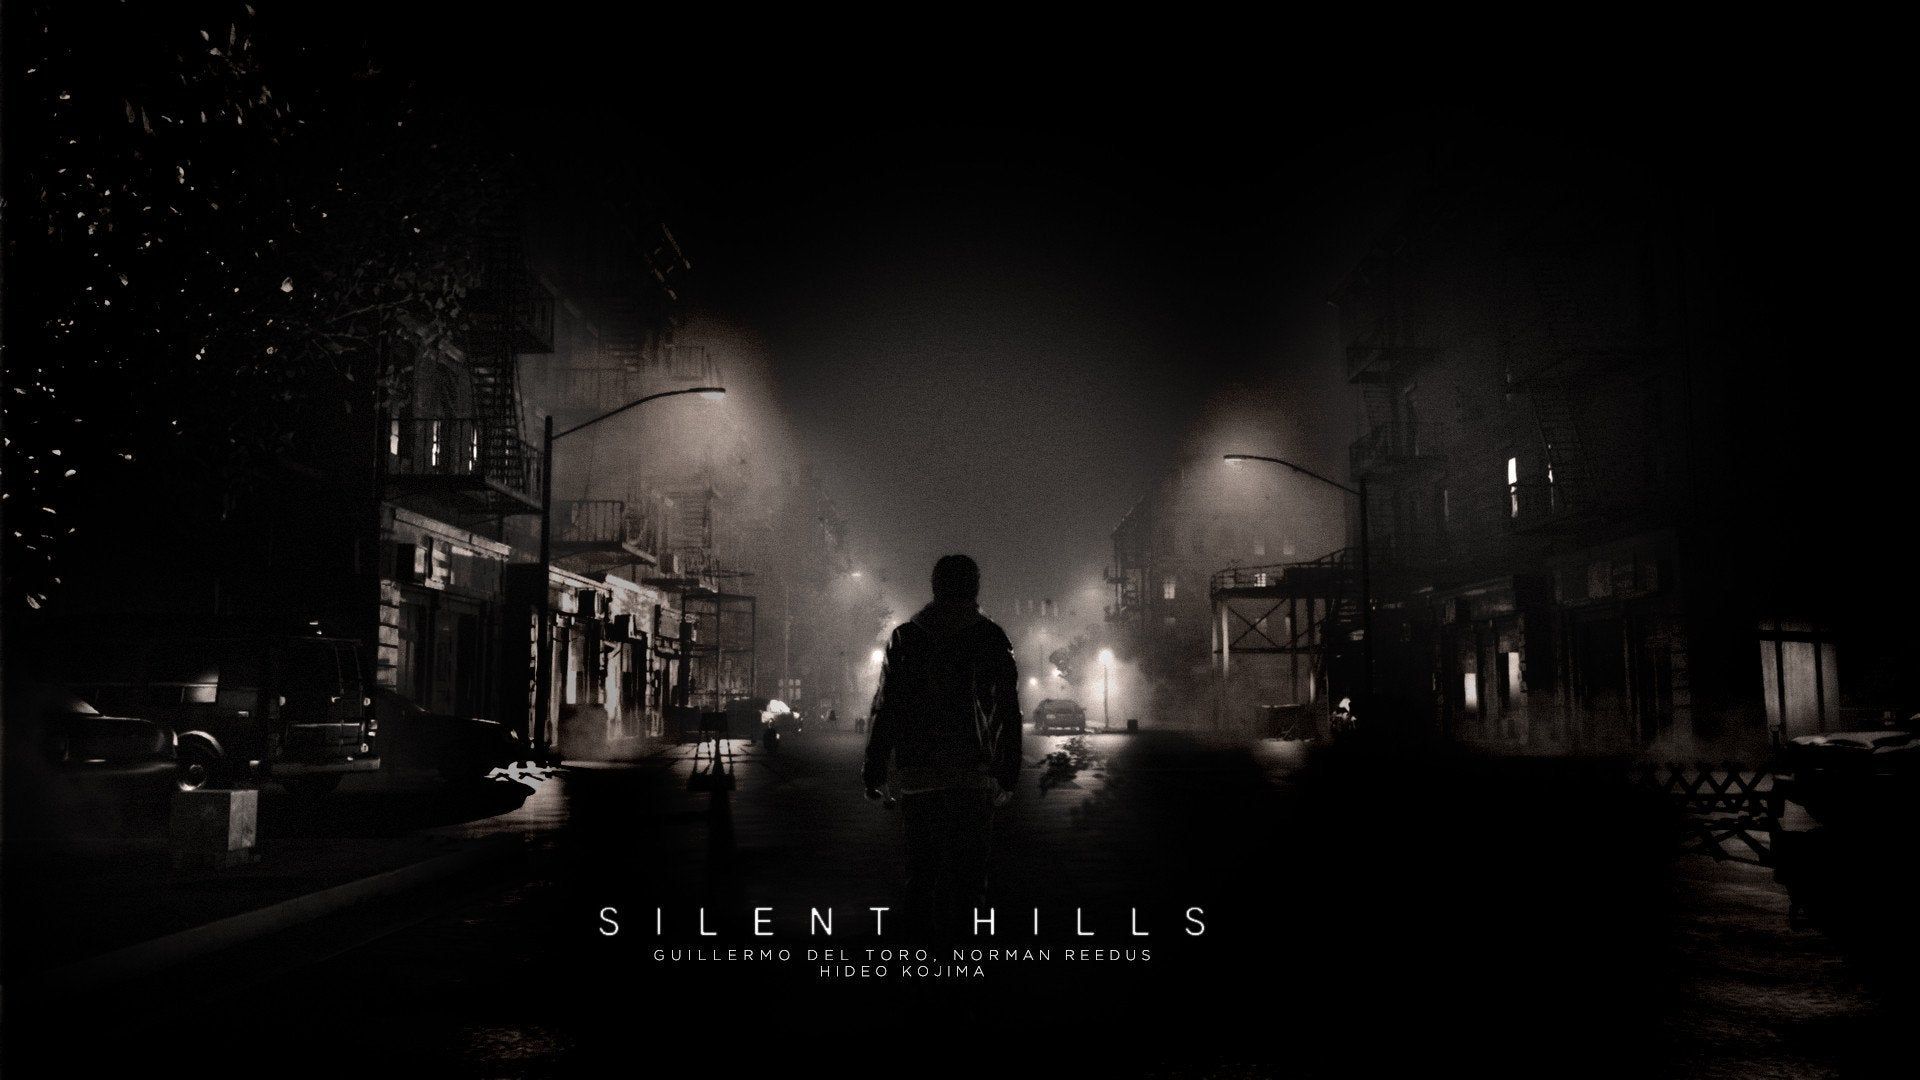 Silent Hill Wallpapers